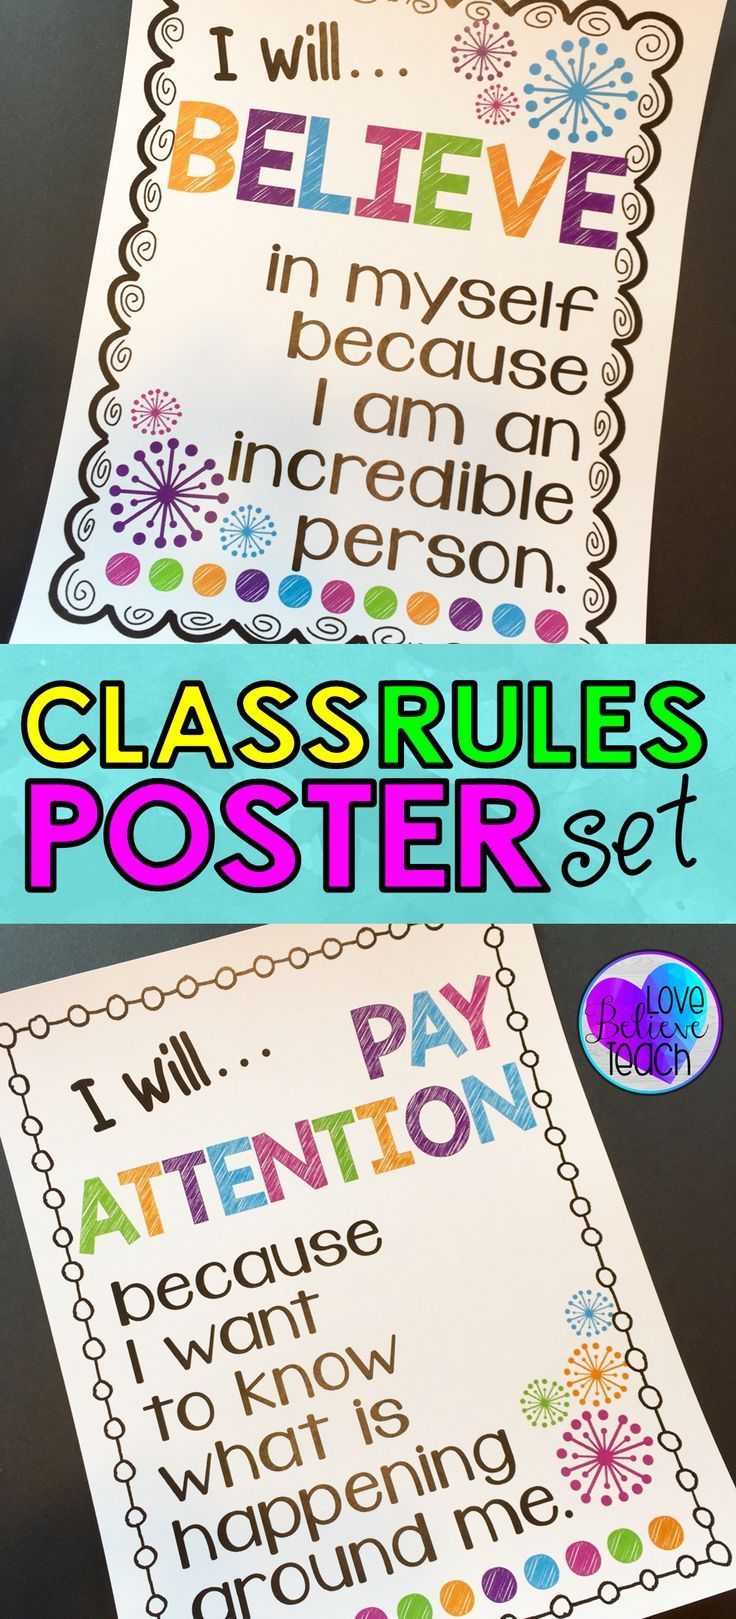 These posters are more than just basic “classroom rules”. They are a great way to help your